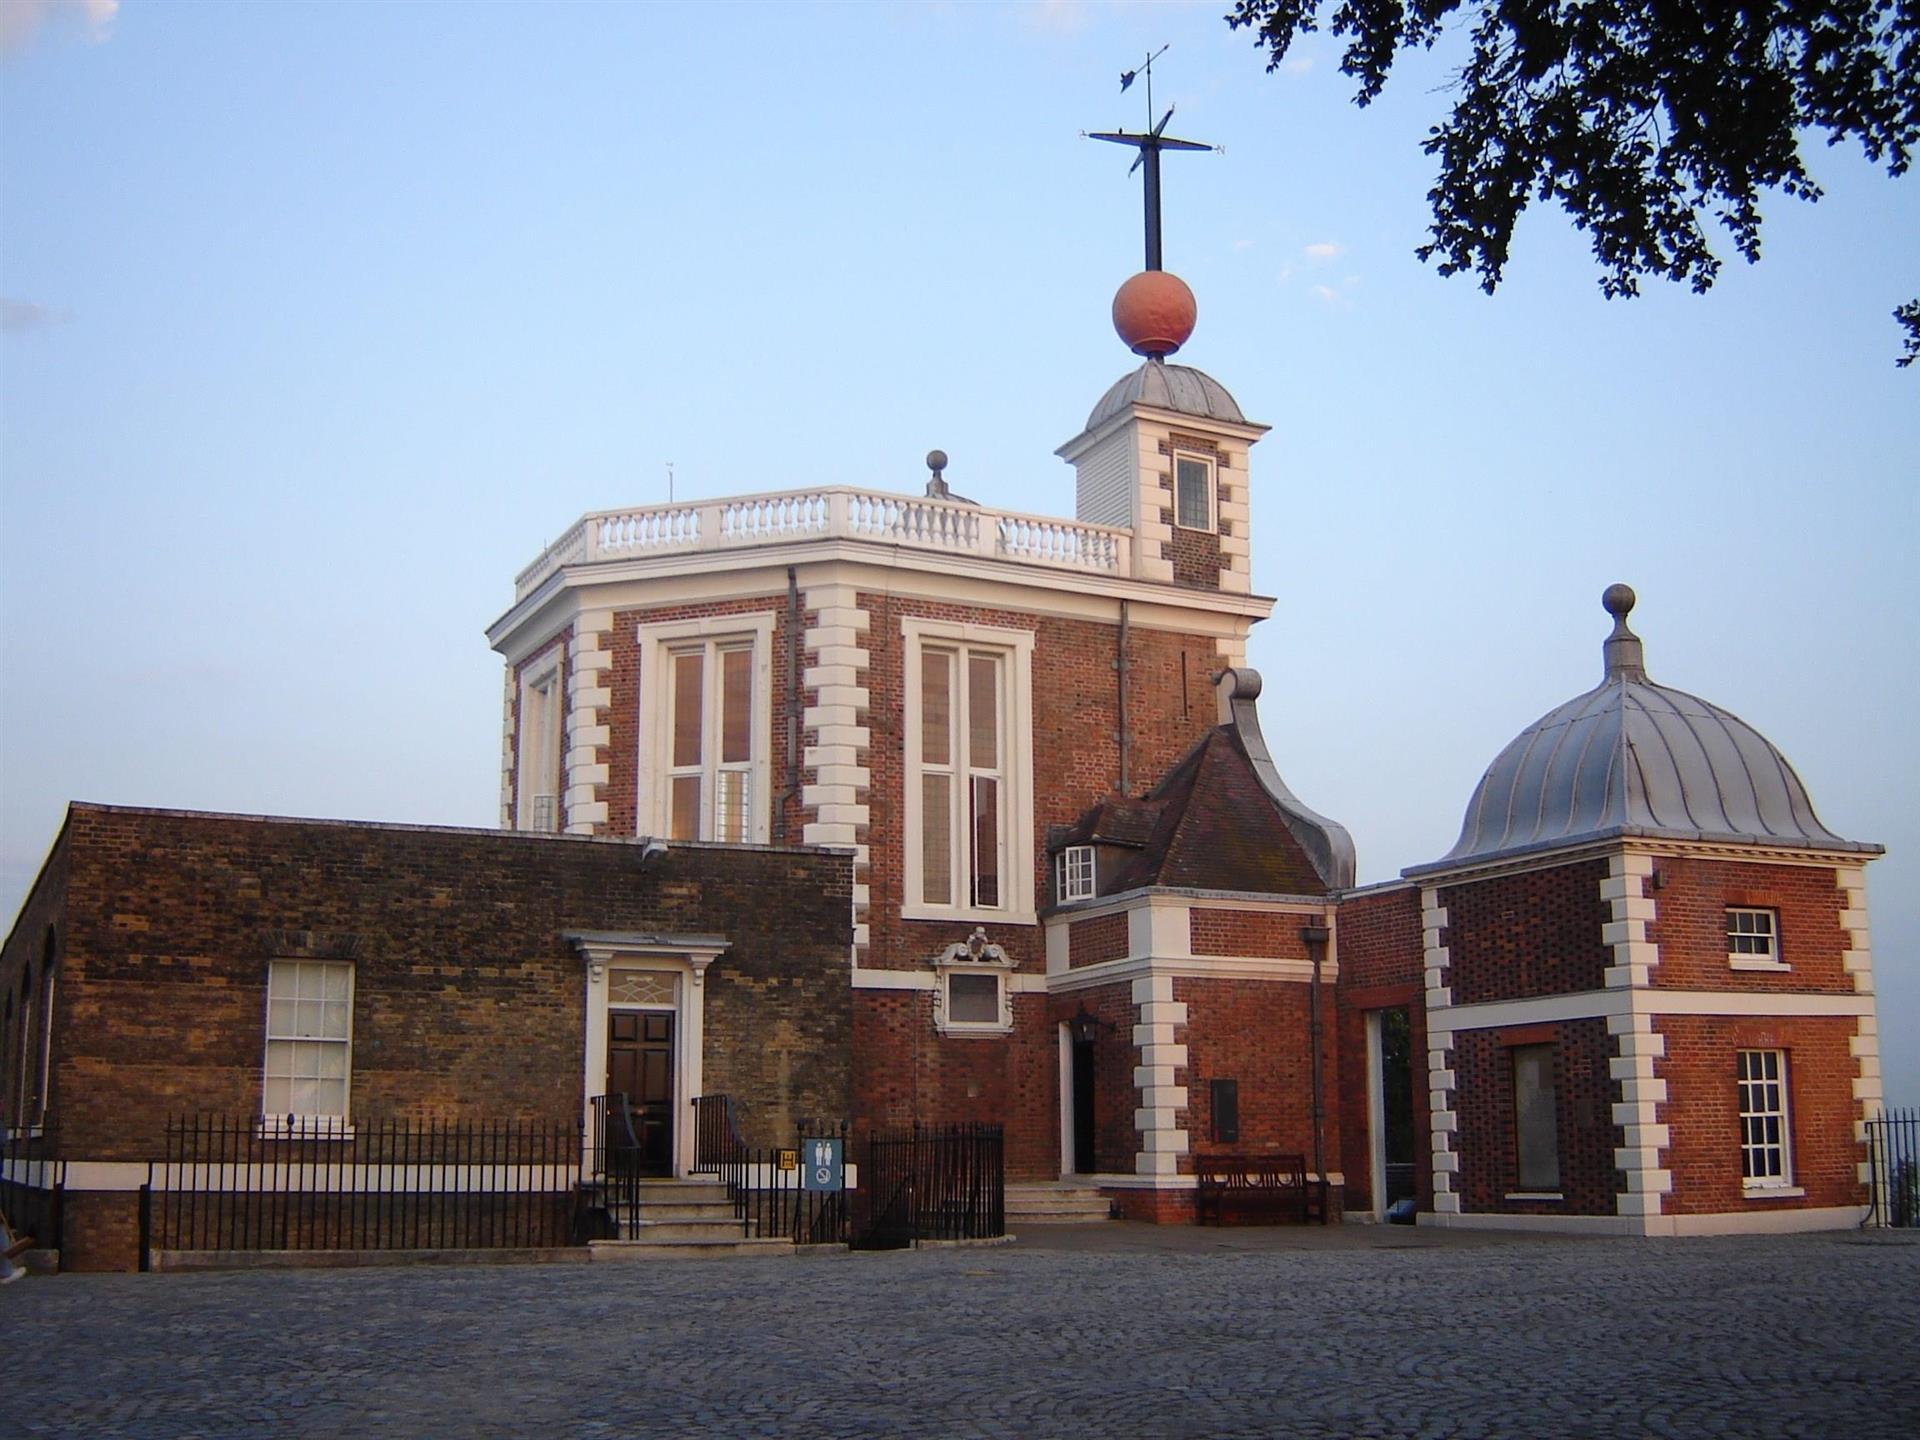 The Royal Observatory in London, GB1